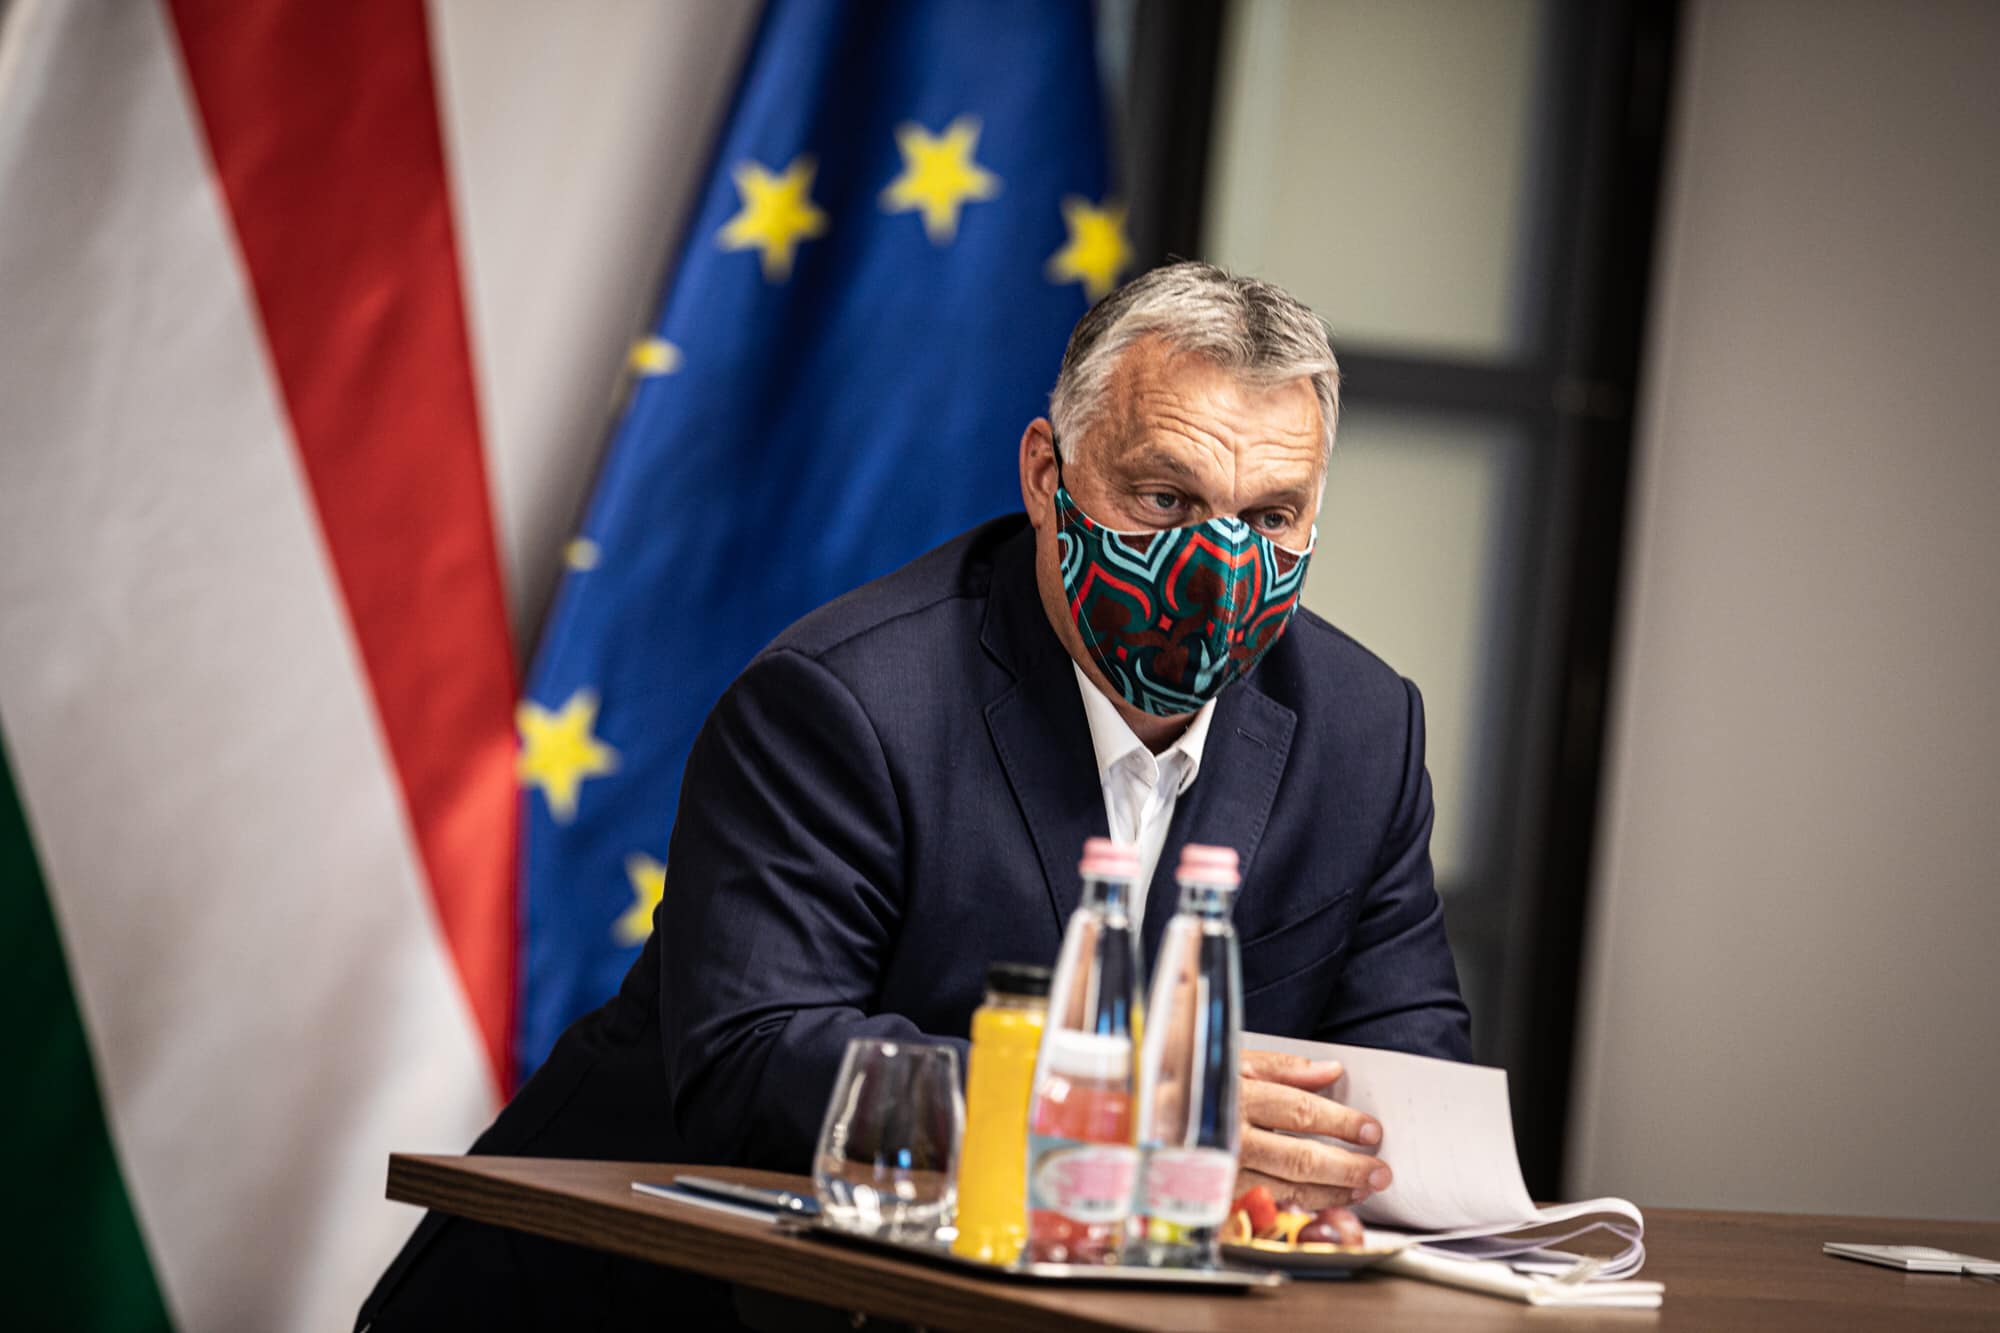 orbán in mask